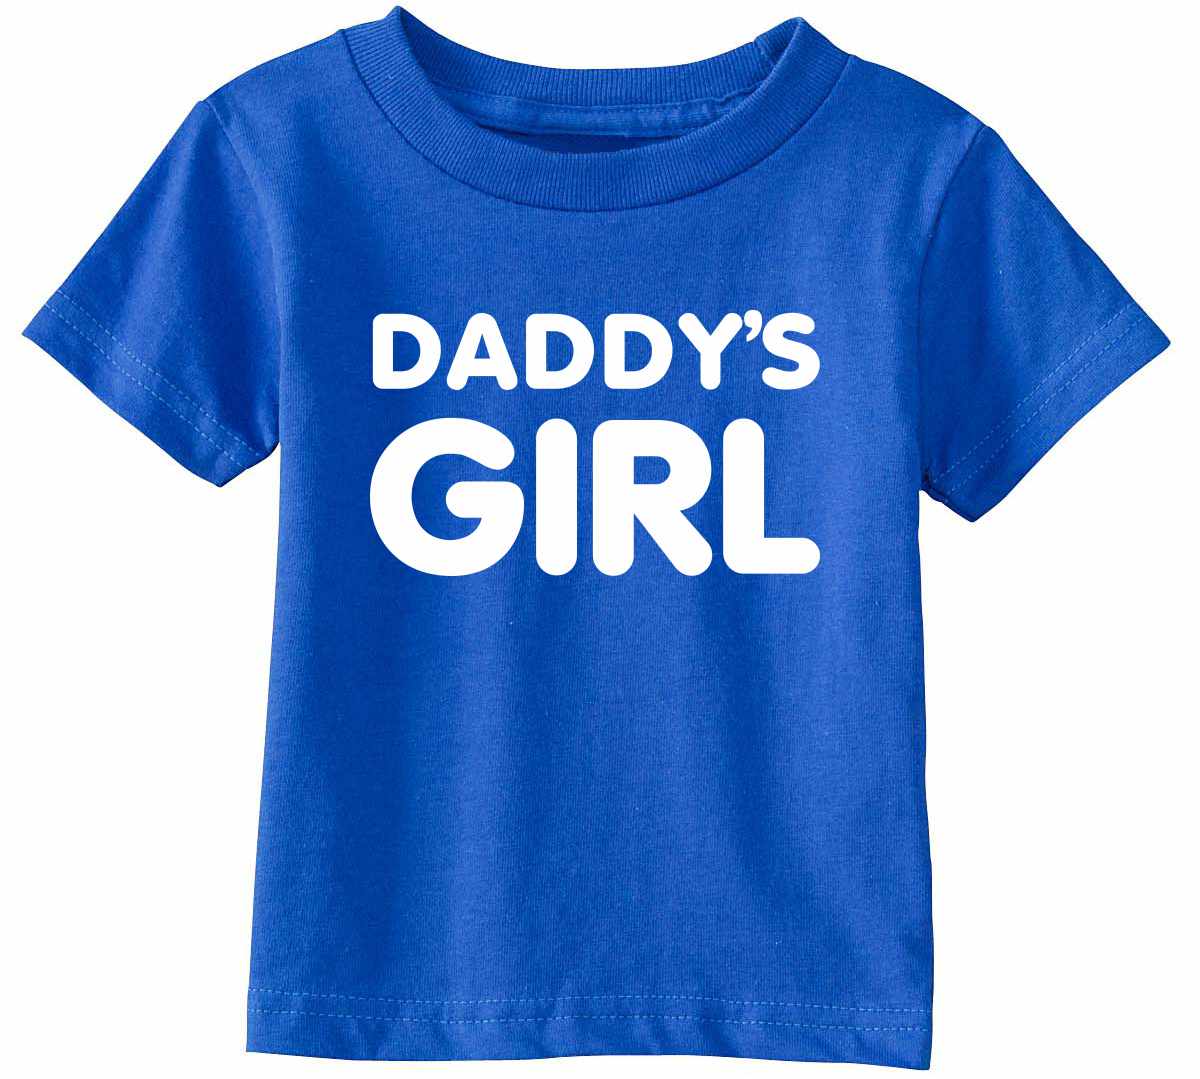 Daddy's Girl on Infant-Toddler T-Shirt (#1218-7)